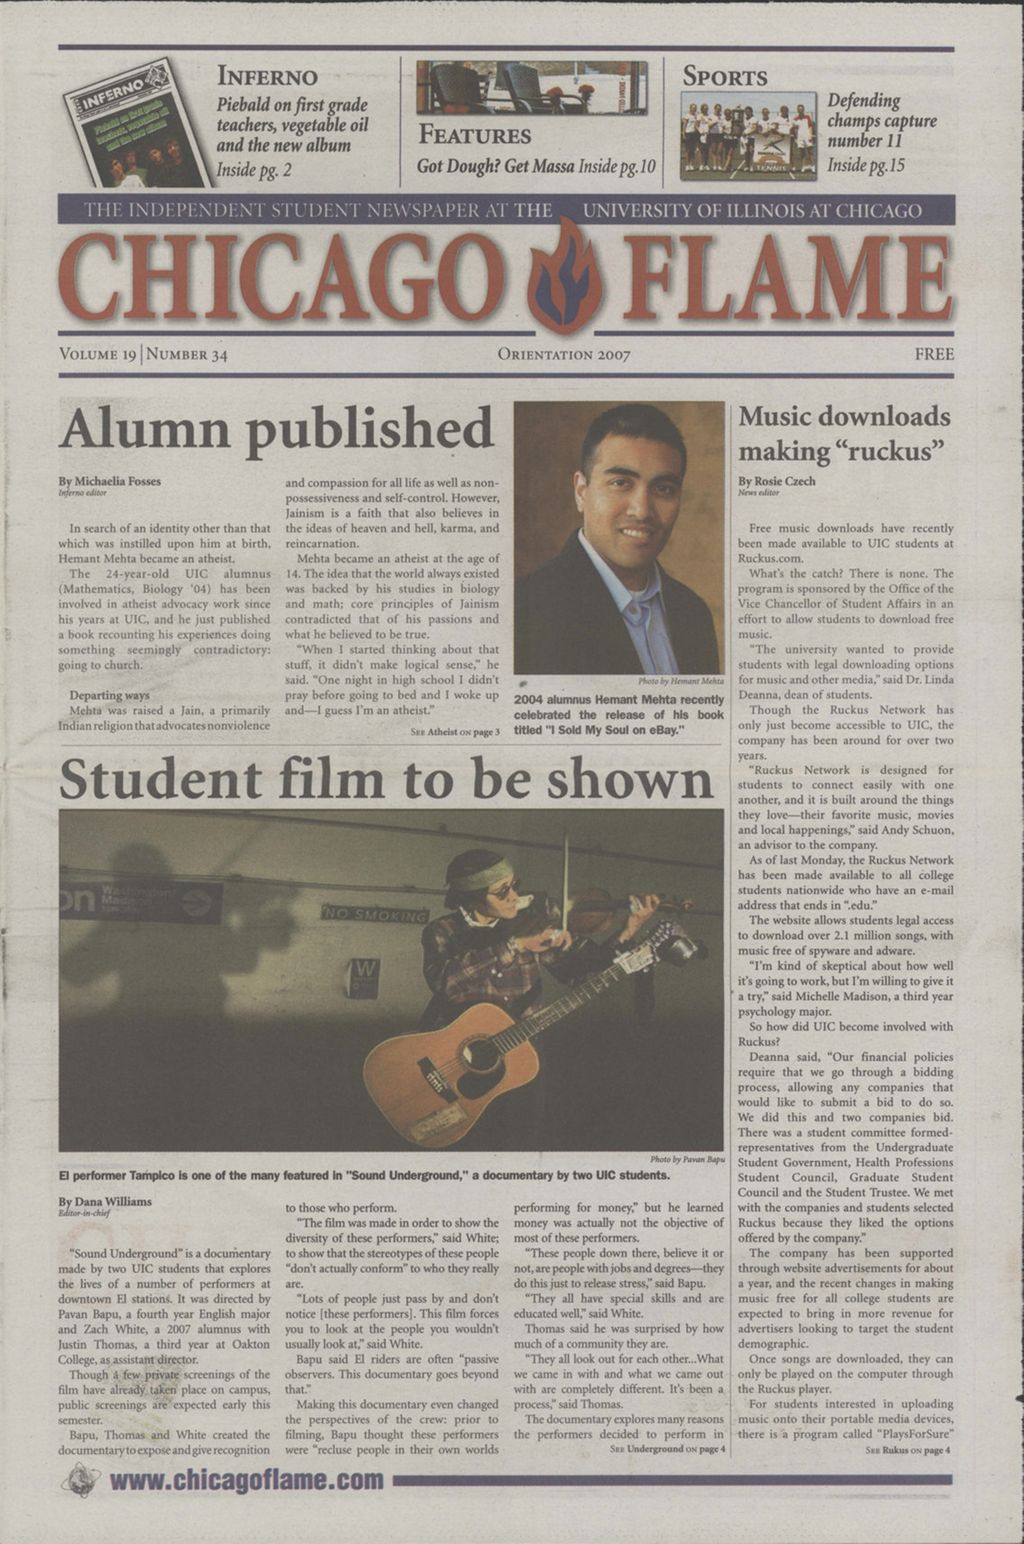 Miniature of Chicago Flame (Orientation, 2007)